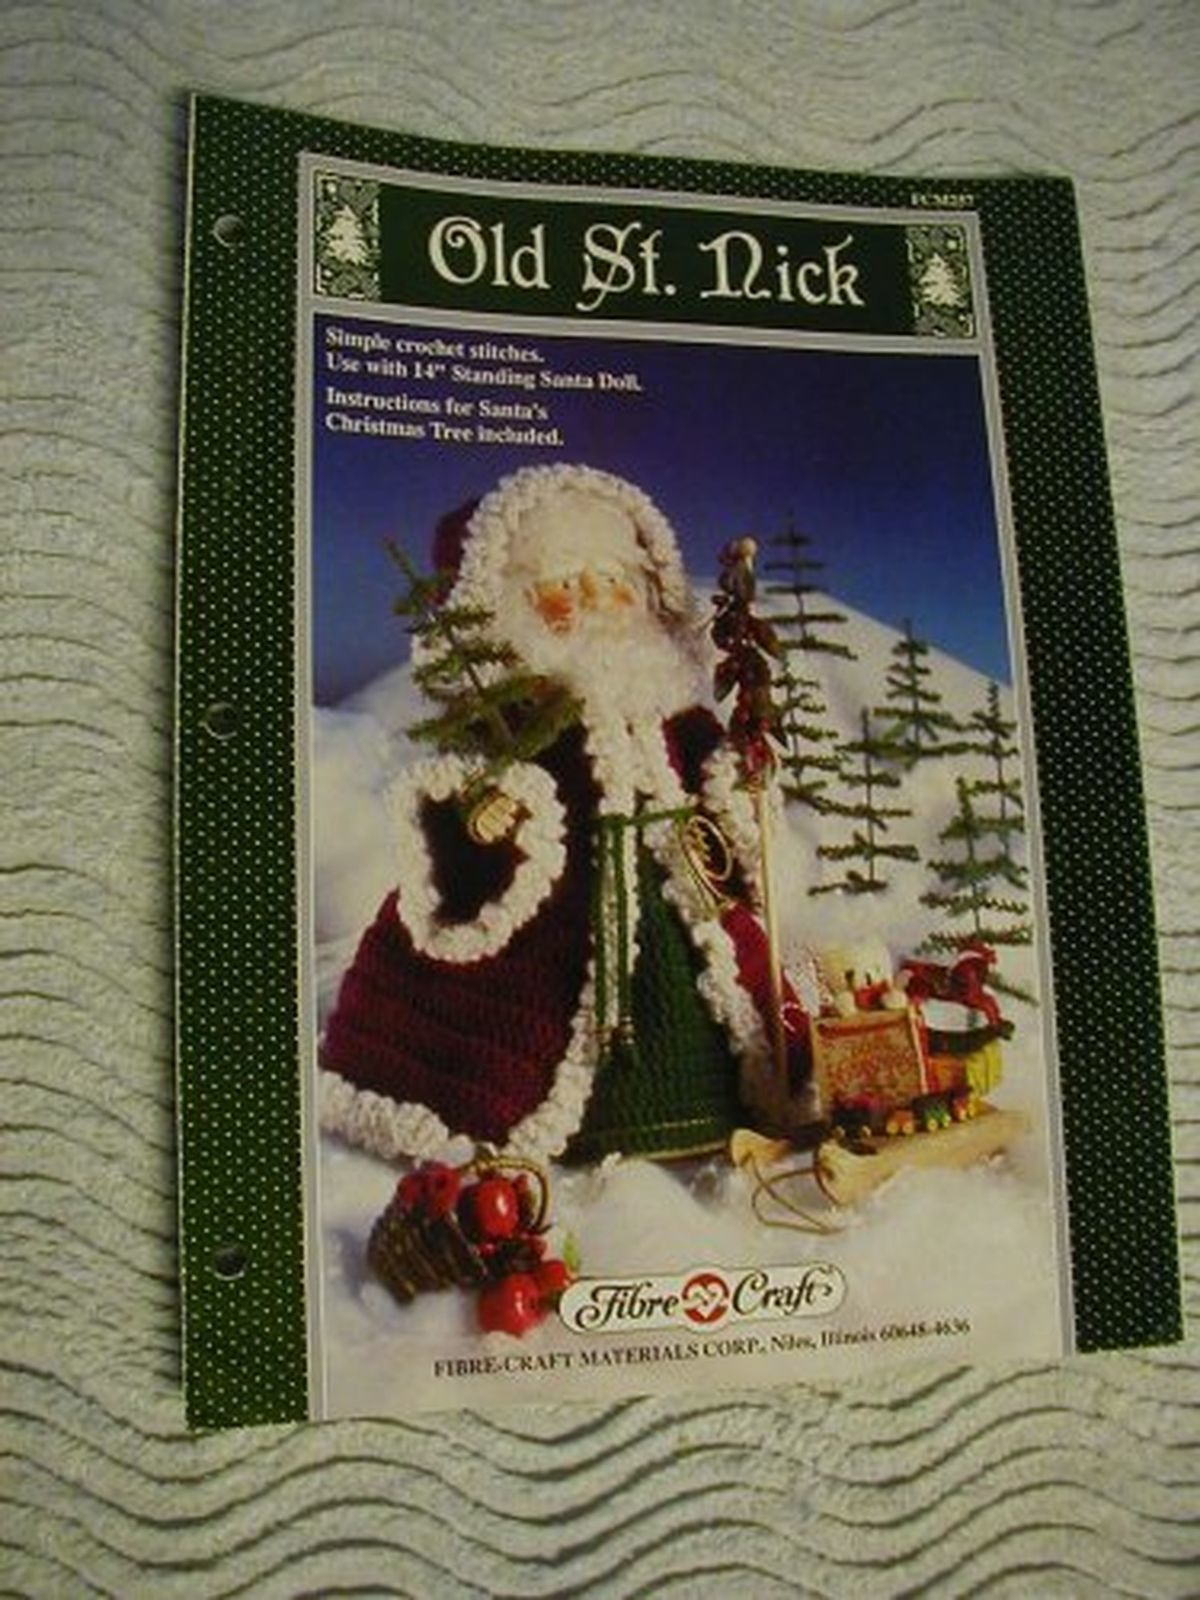 Old St Nick Simple crochet stitches 14” Standing Santa Doll Christmas Tree - $10.58